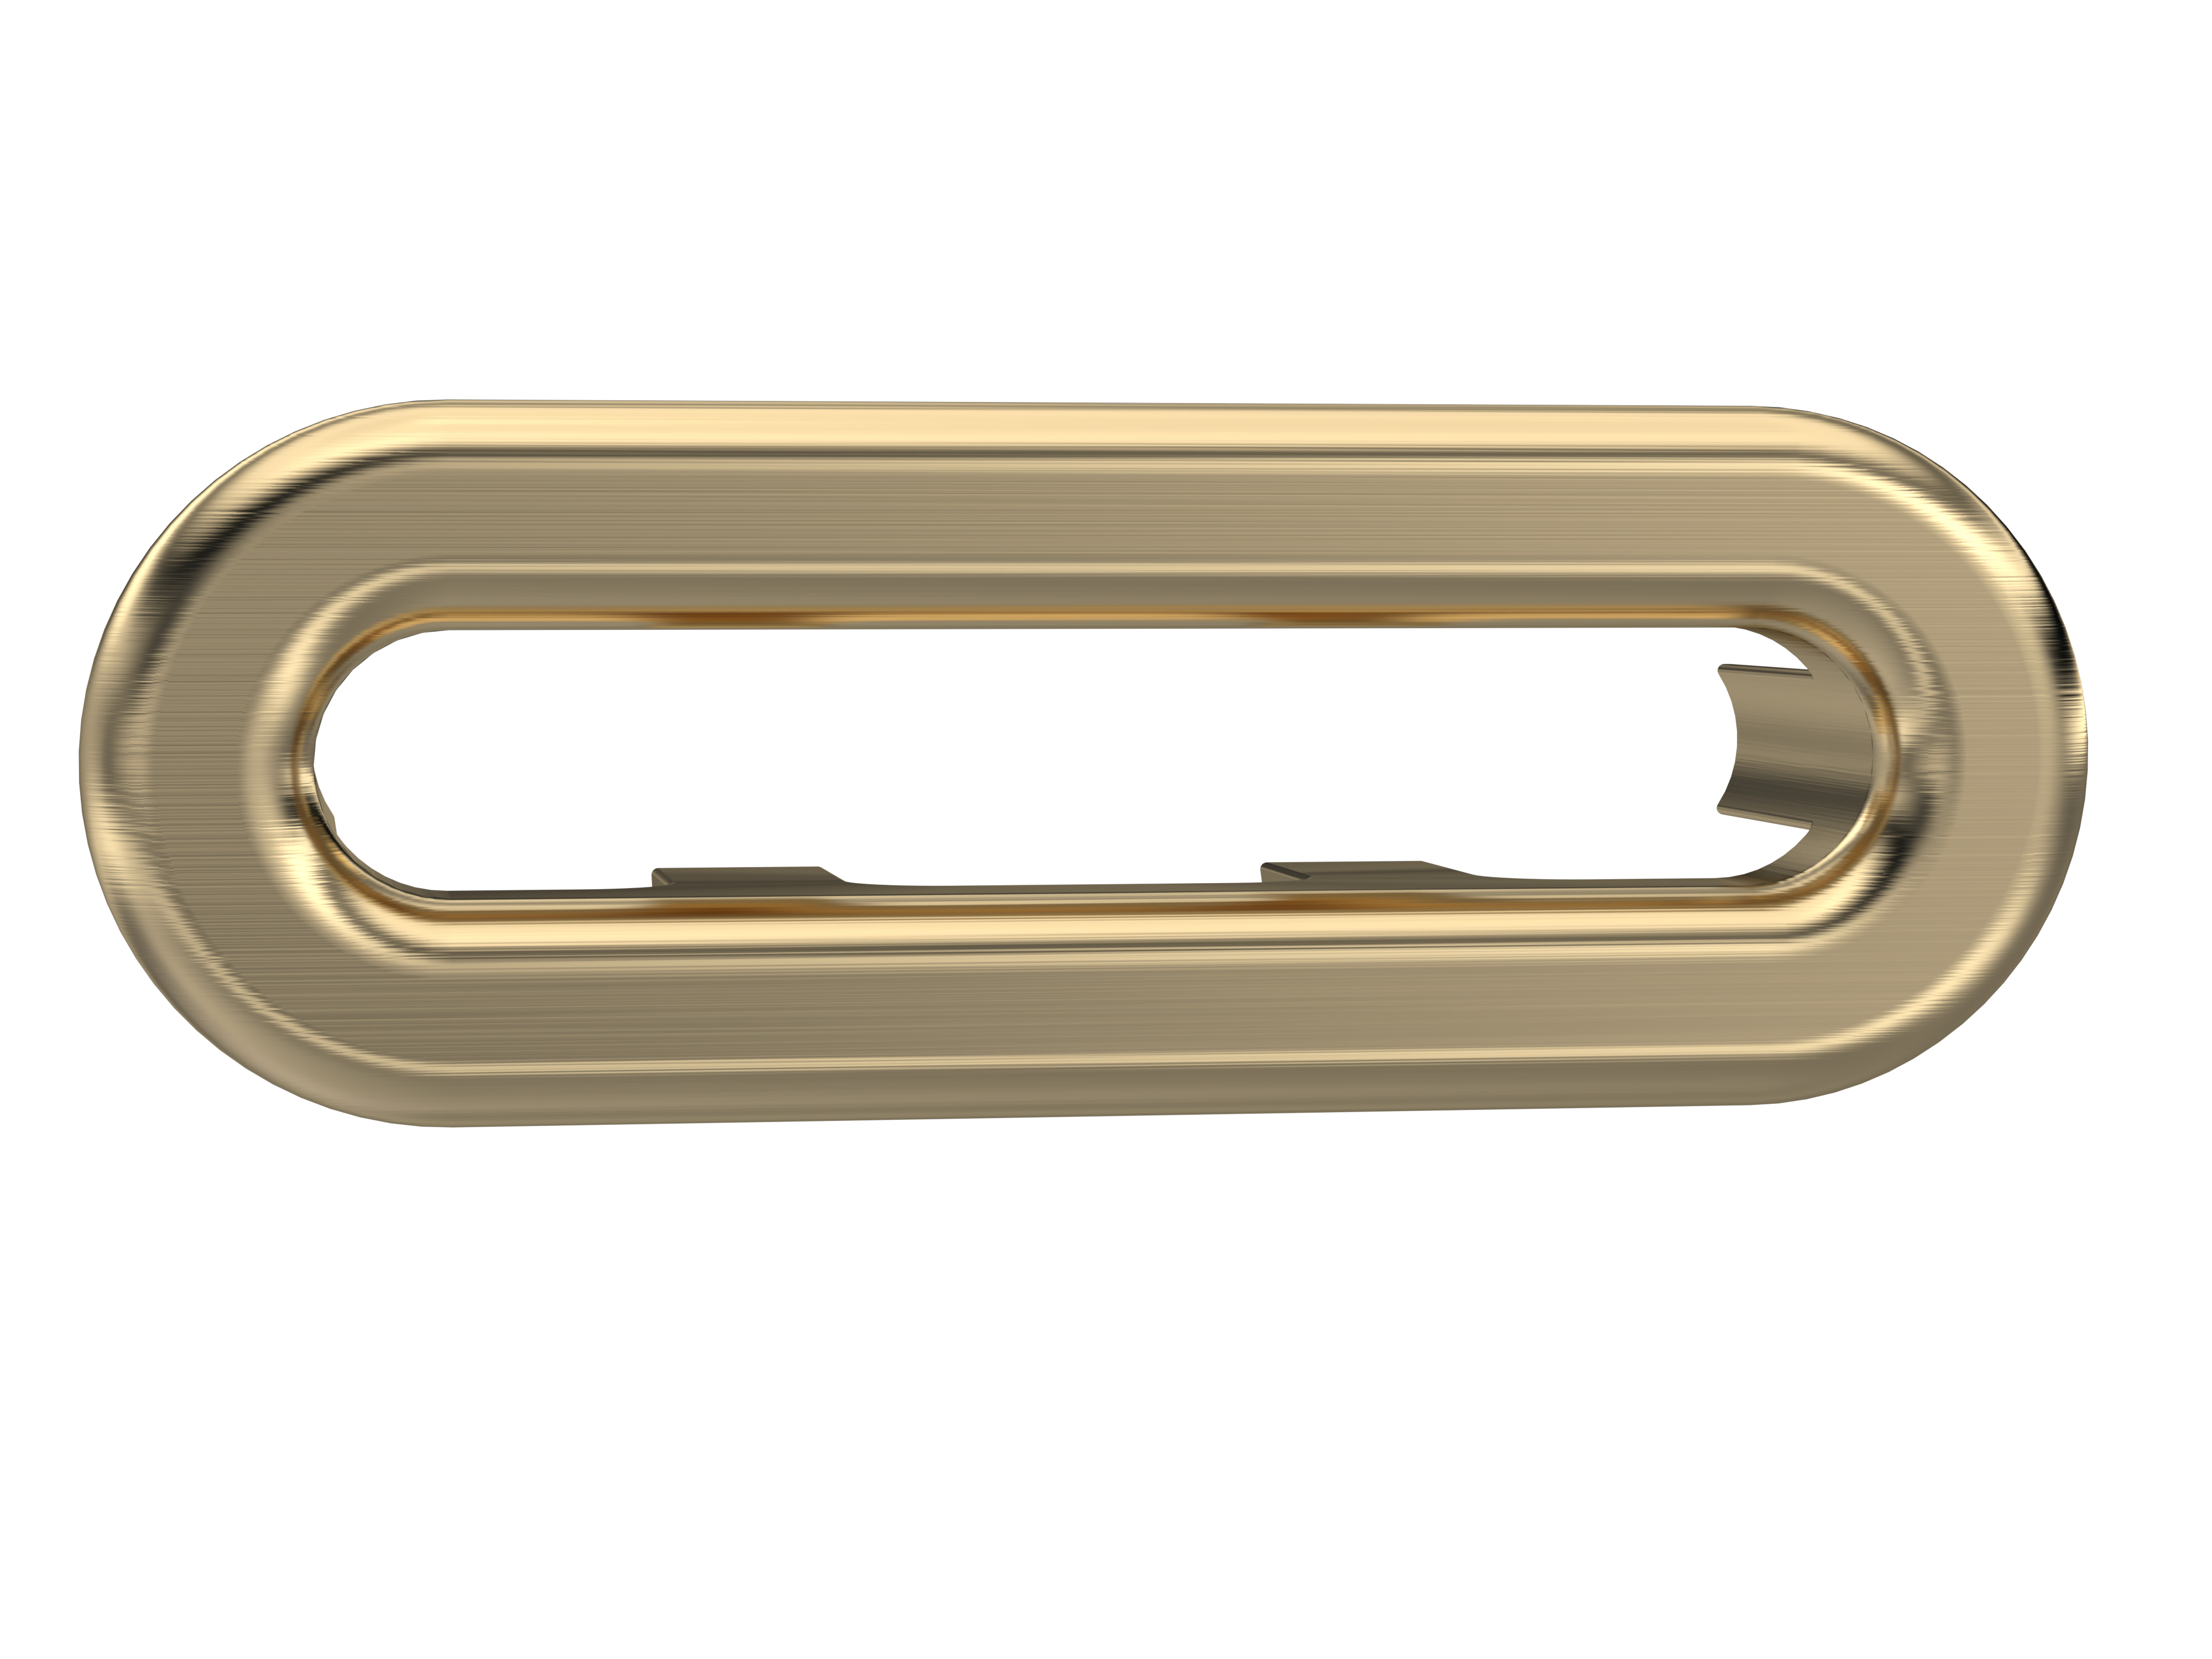 Hudson Reed Ceramics Accessories Oval Brushed Brass Overflow Cover (18884)